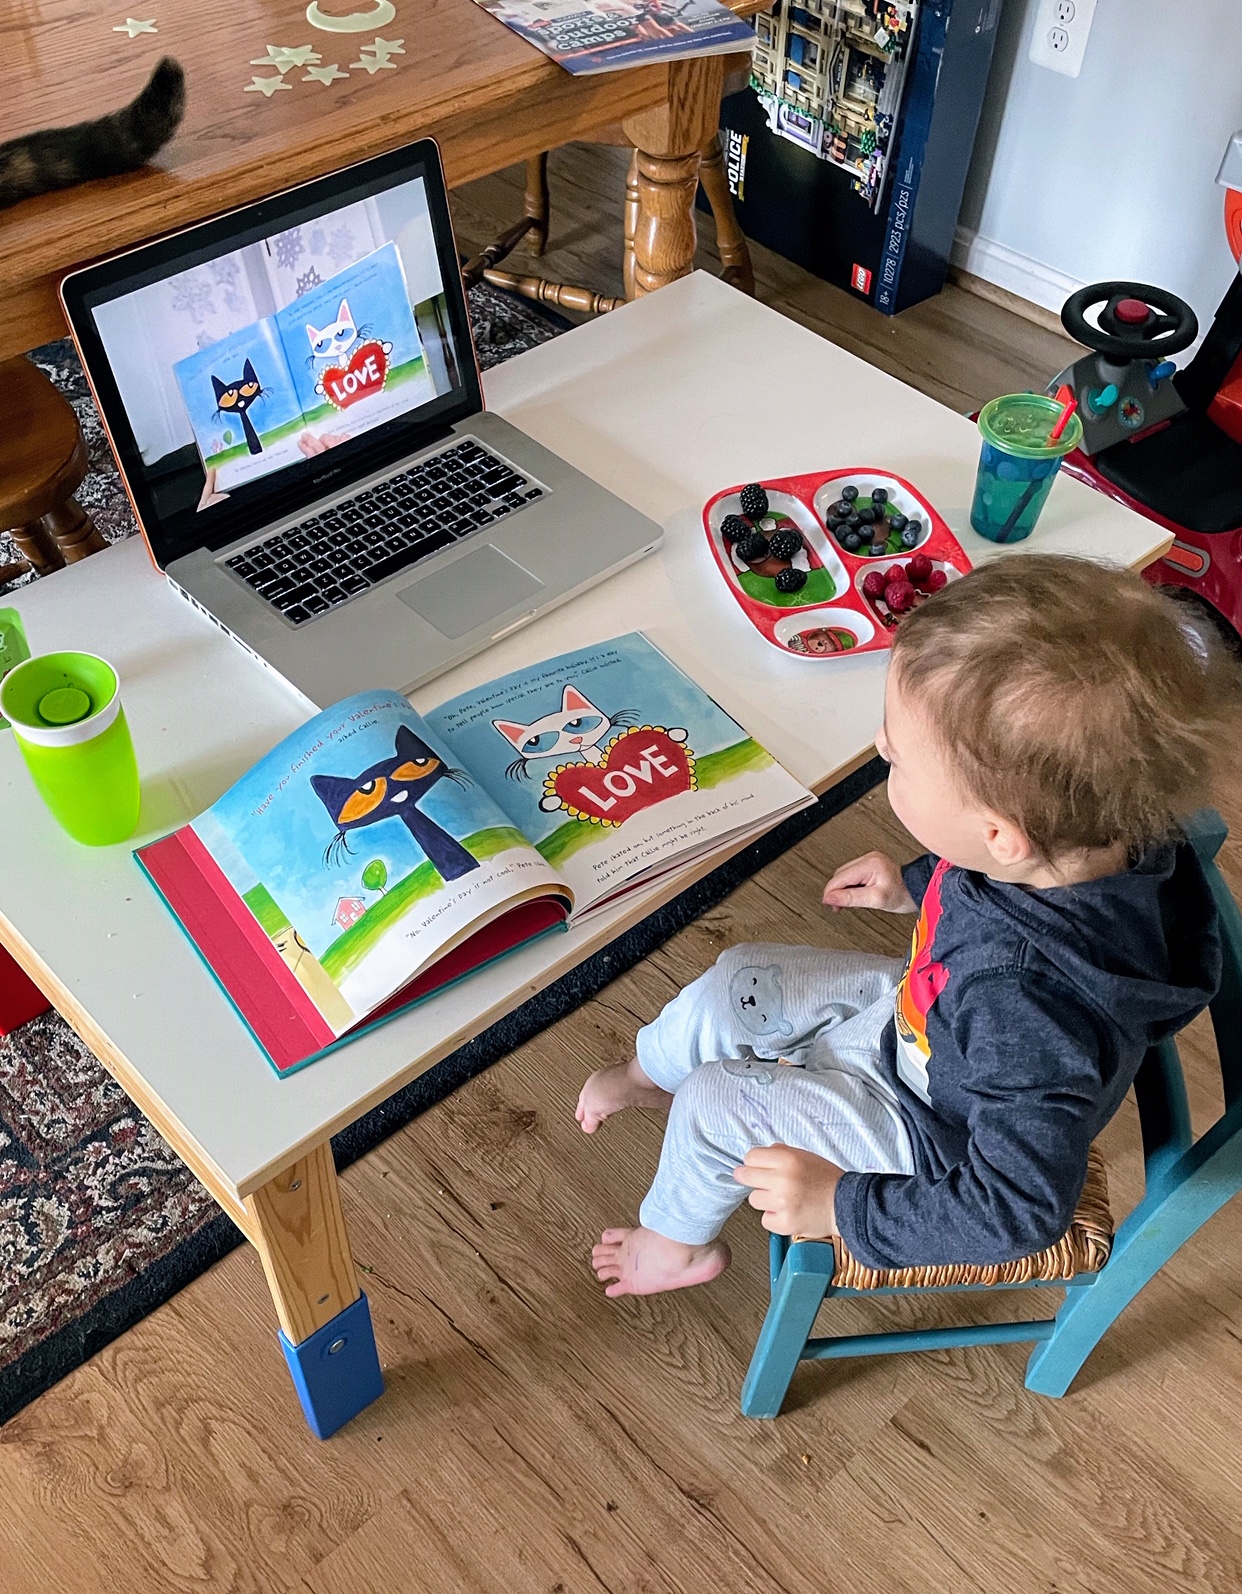 Child sitting at desk watching Story Time on computer and following along with book